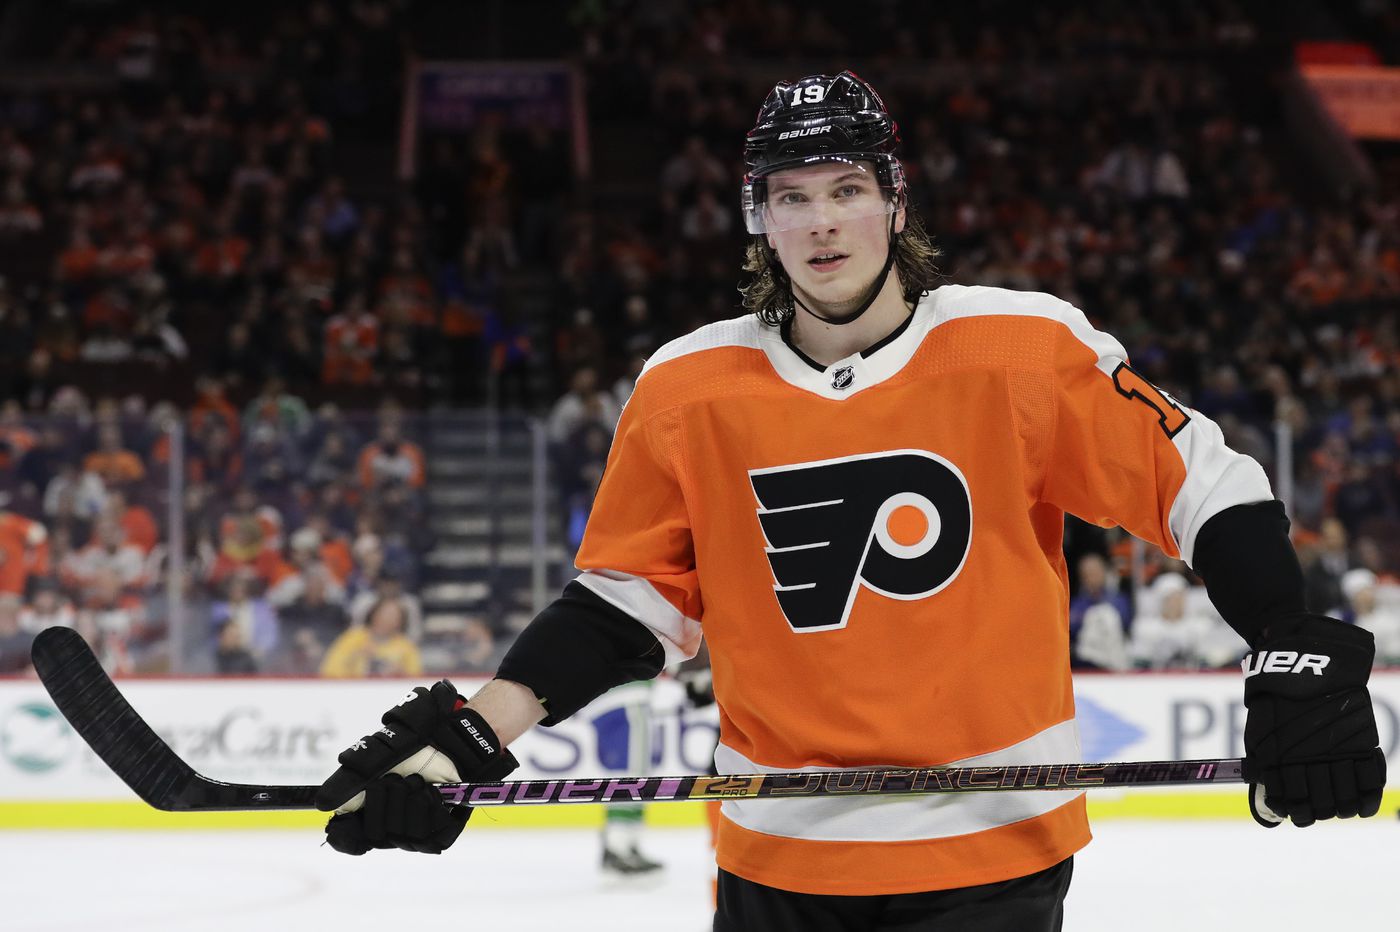 Nolan Patrick on ice for Flyers at practice; says he expects to play